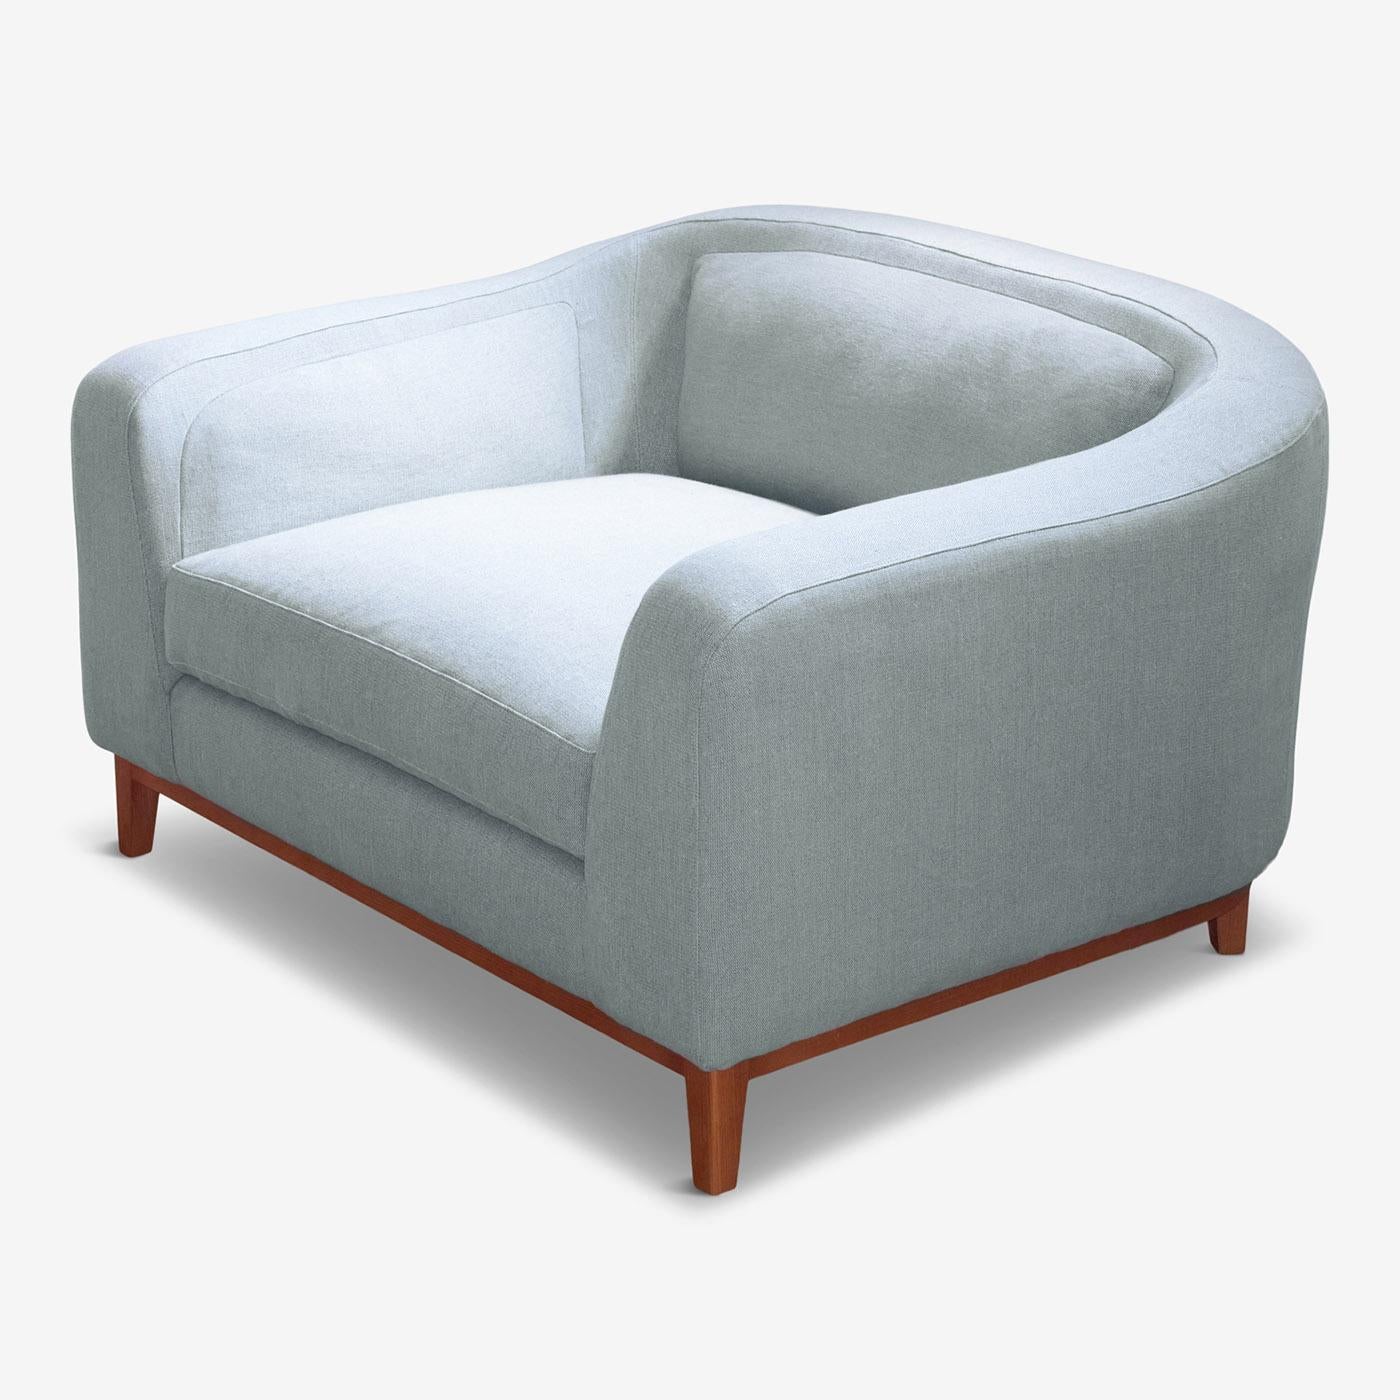 Contemporary and compact, this playful armchair by Brian Sironi adds style to any room. Featuring a mid-century classic design with a modern twist, the legs and entire framework are crafted in solid beech wood and the seat and back have practical